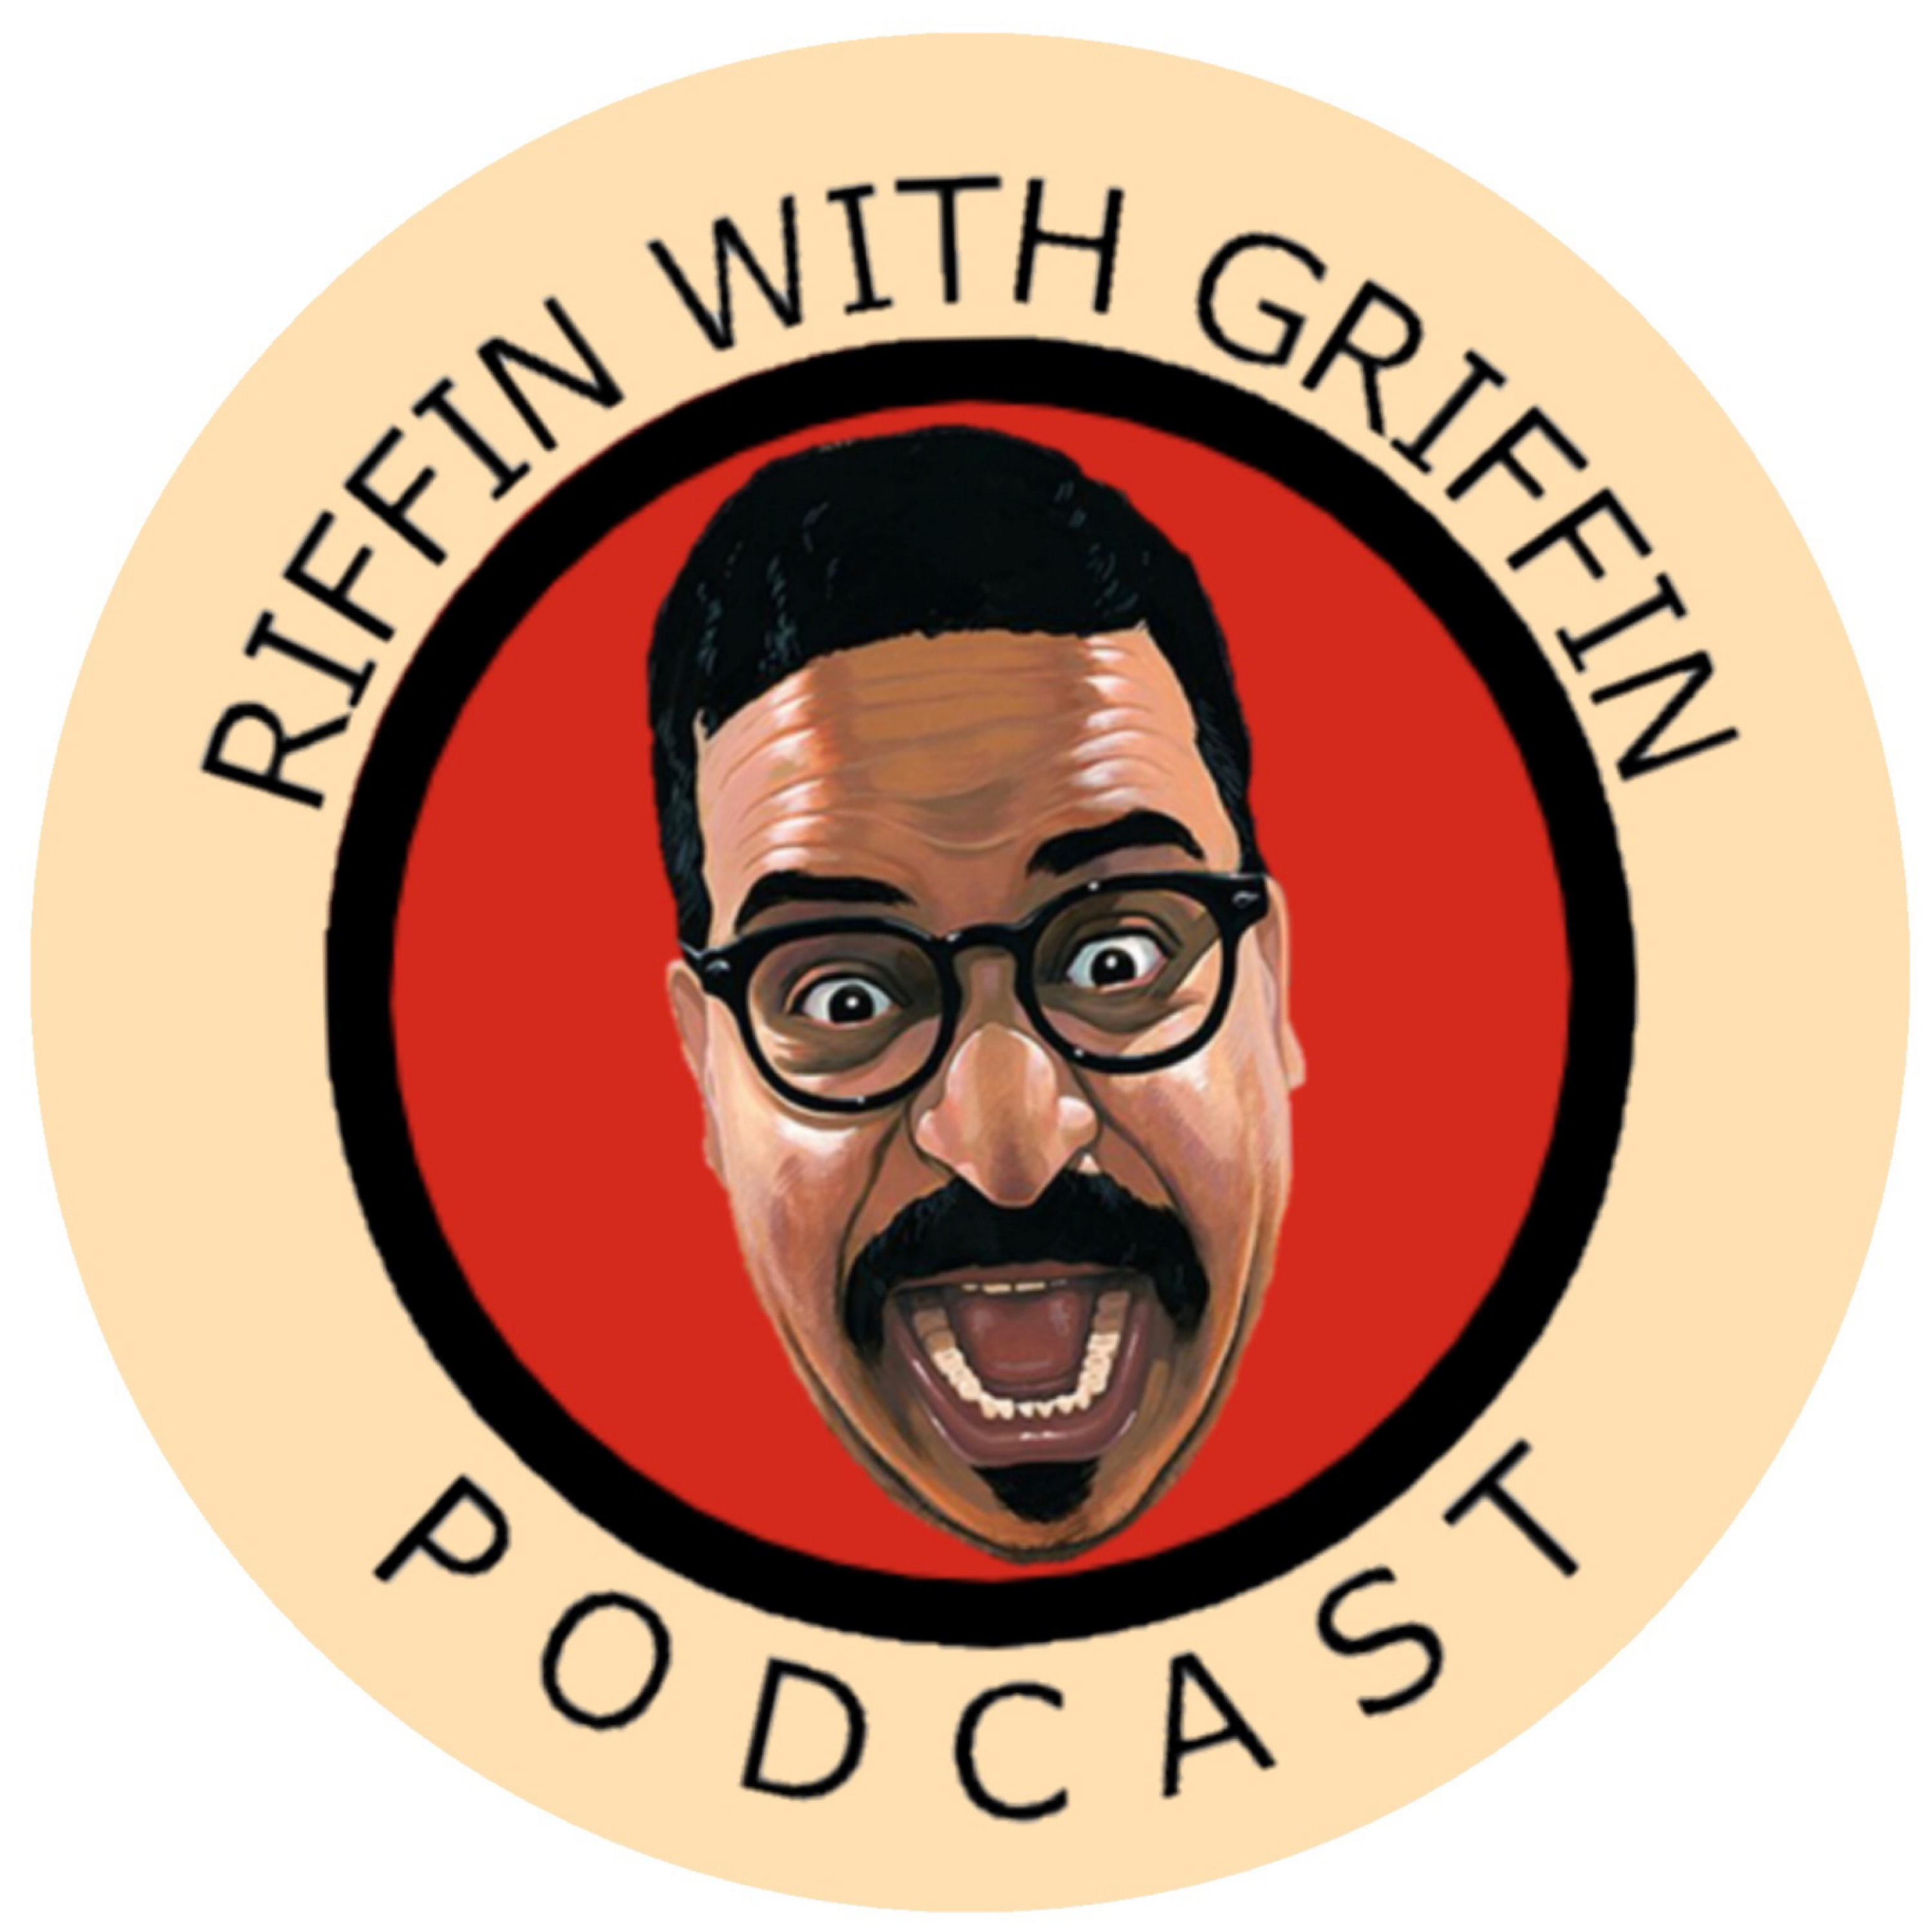 Shane SNL, Cancelled Comedians, Air Bender Netflix: Riffin With Griffin EP269